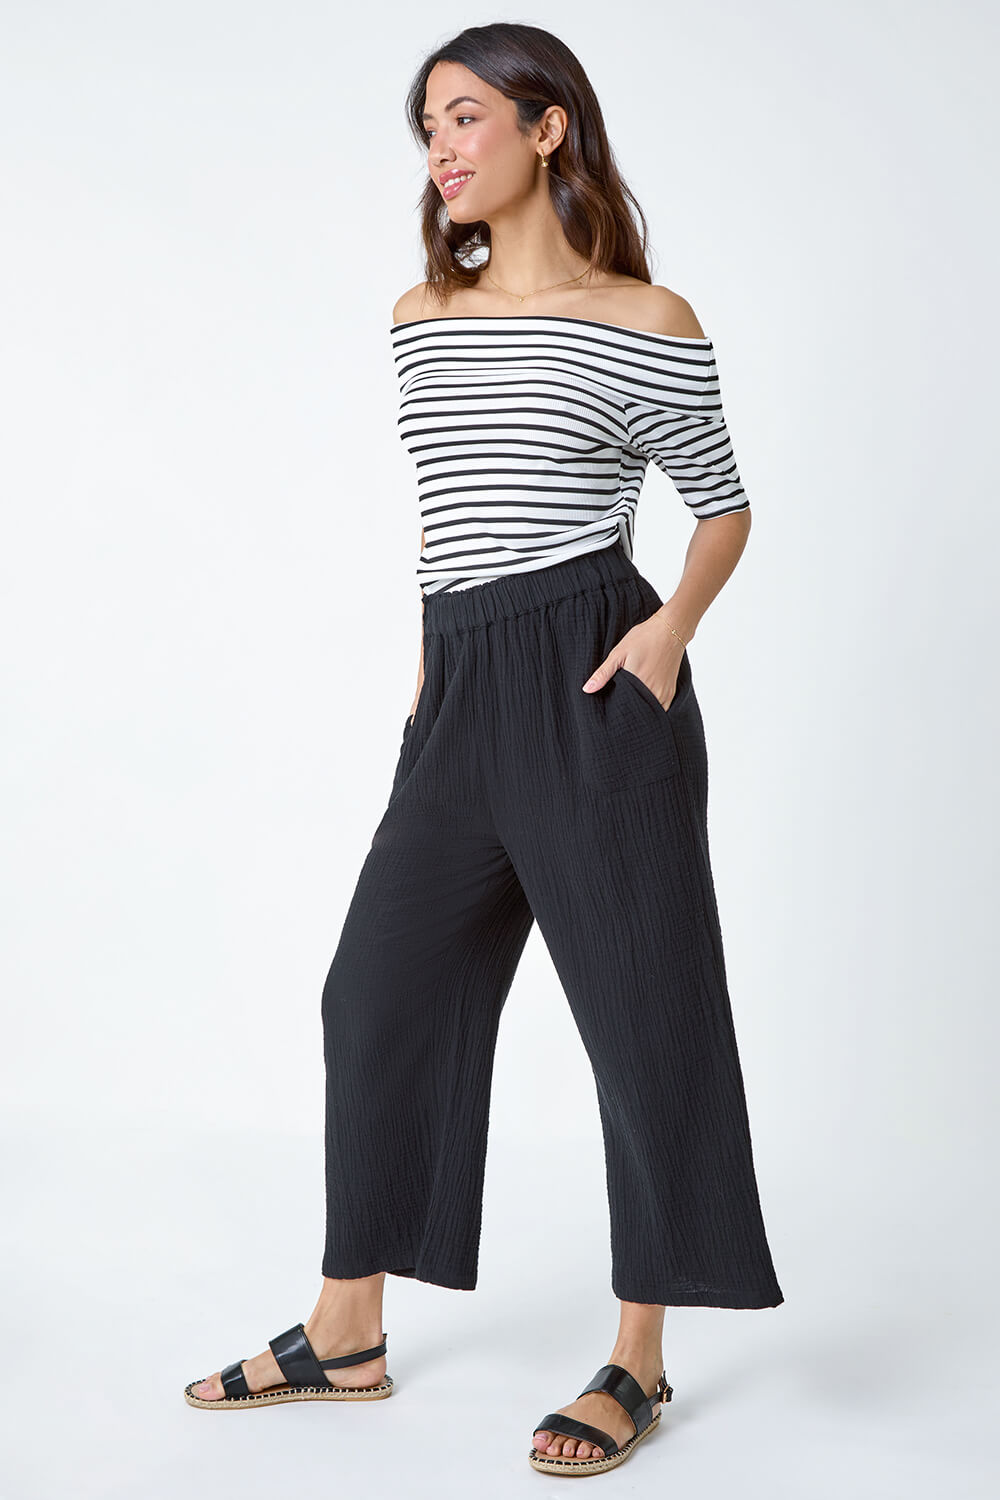 Black Textured Cotton Culotte Trousers, Image 2 of 5